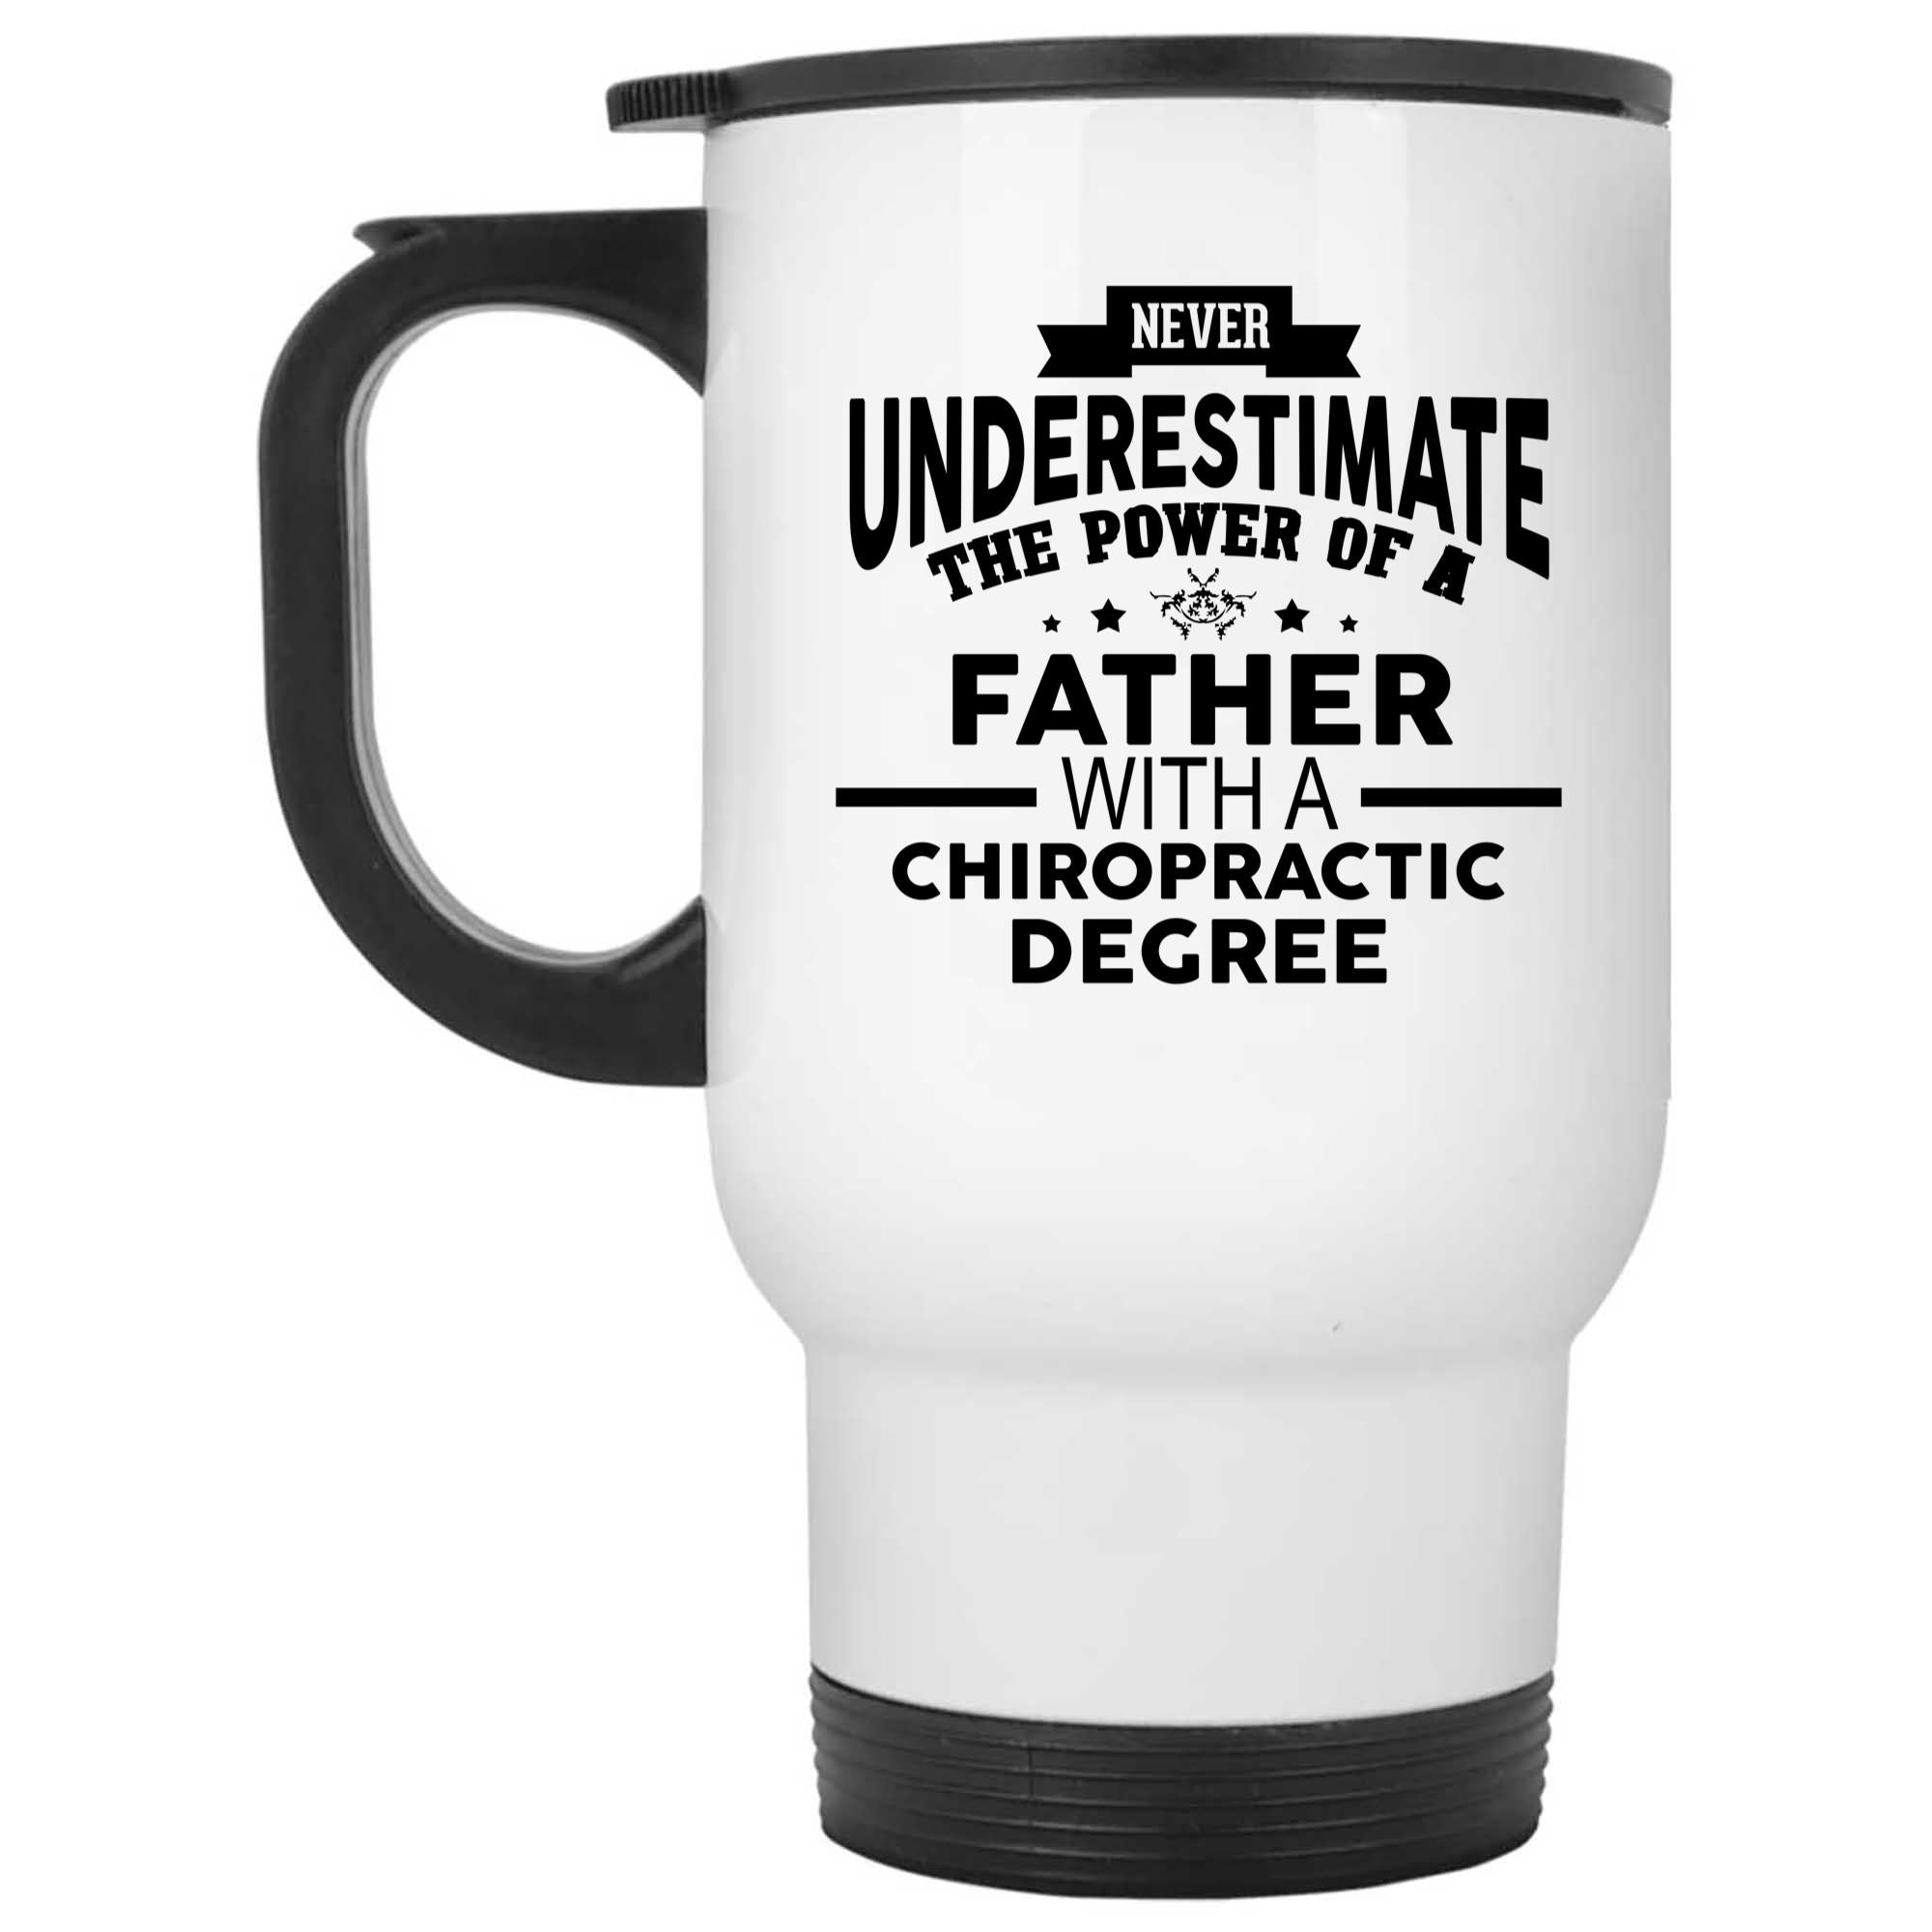 Skitongifts Funny Ceramic Novelty Coffee Mug Chiropractic Never Underestimate The Power Of A Father With A Chiropractic Degree W1VMJY0